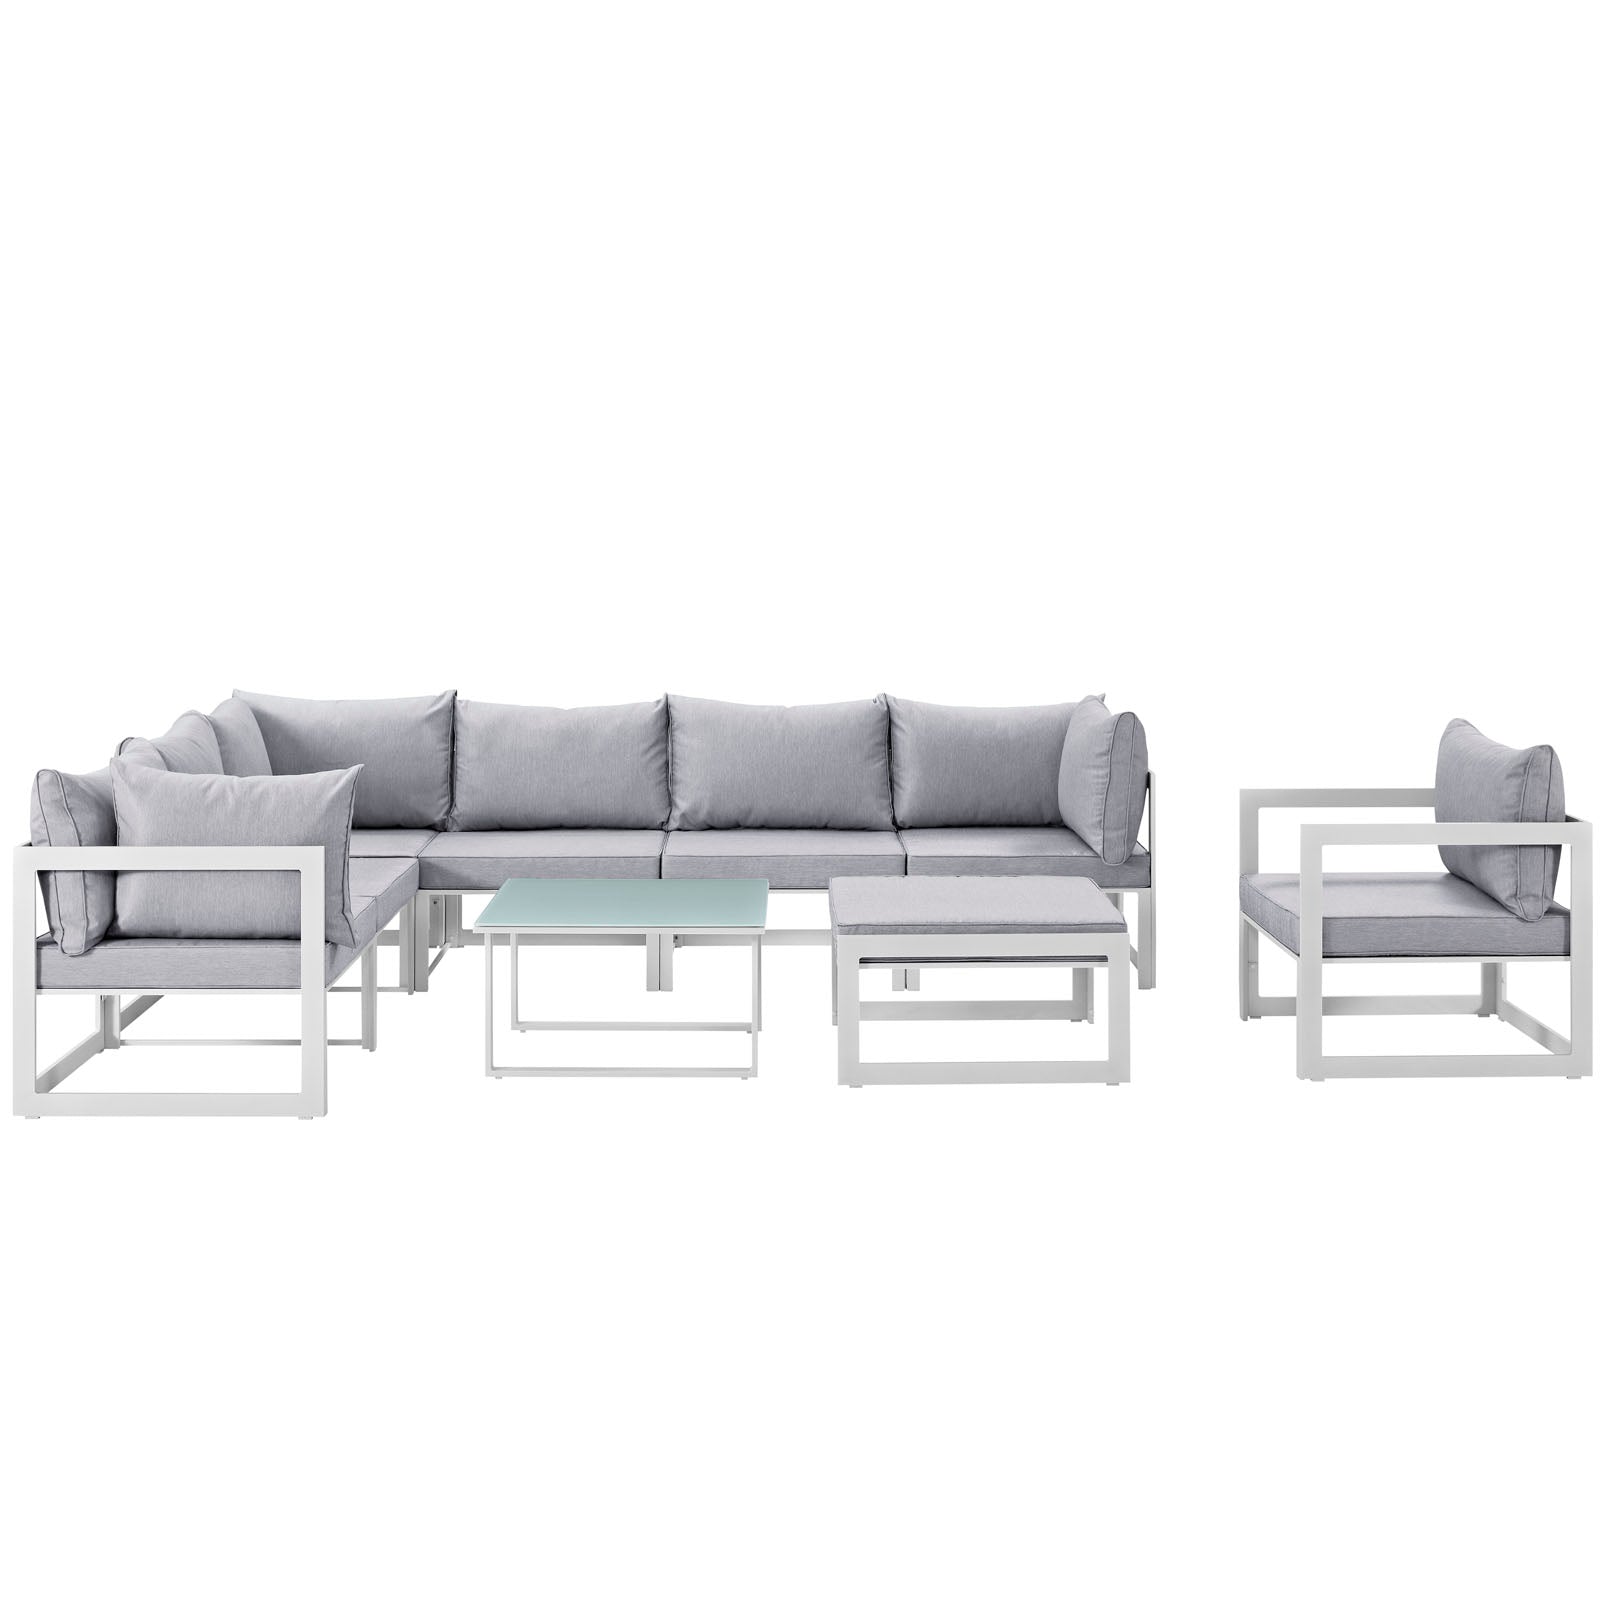 Modway Outdoor Conversation Sets - Fortuna 9 Piece Outdoor 150"W Patio Sectional Sofa Set White Gray